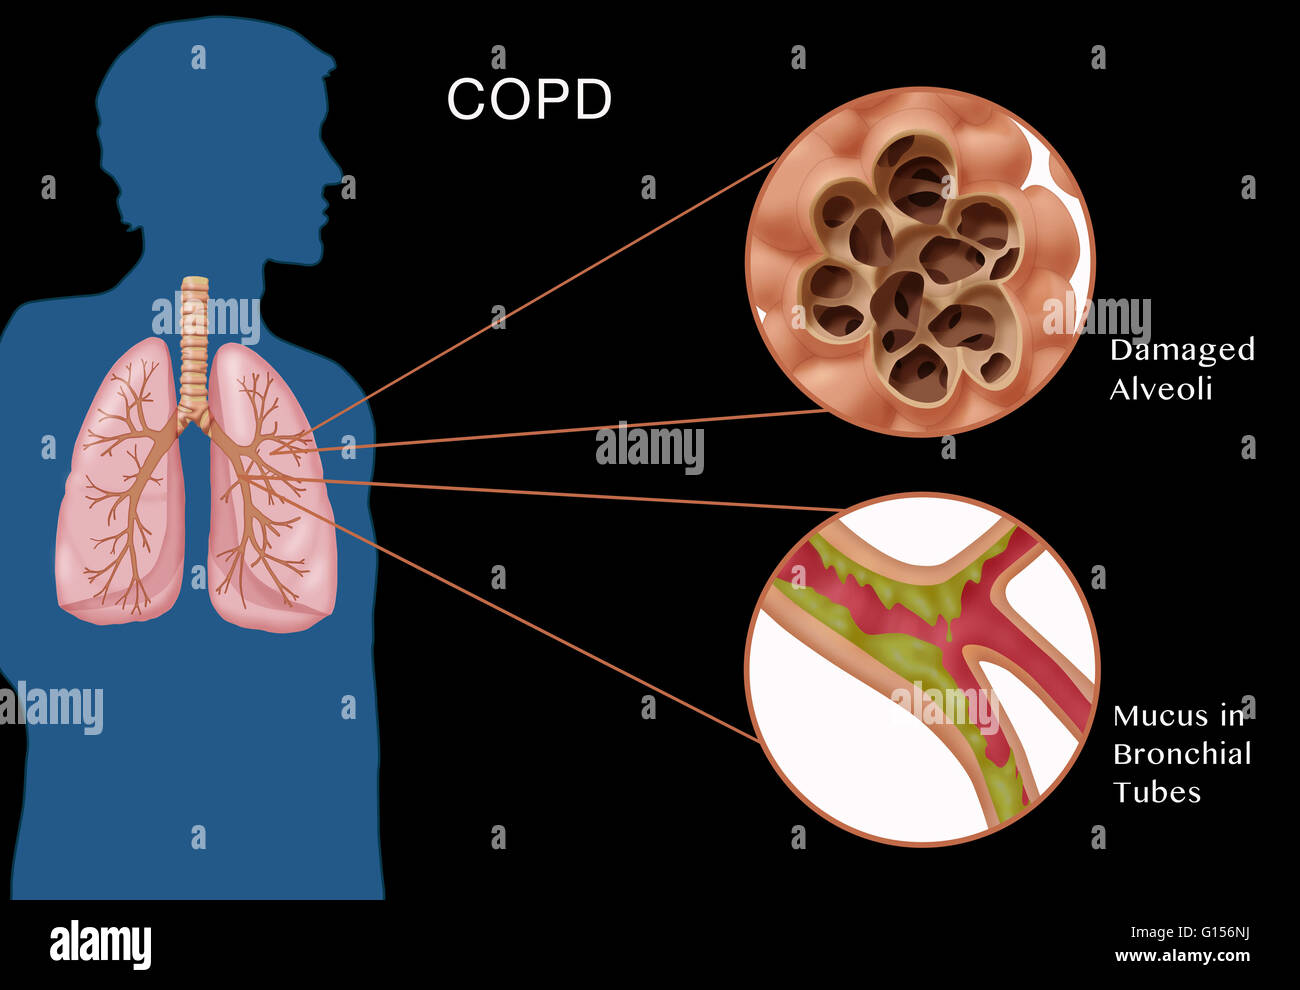 Illustration Of Chronic Obstructive Pulmonary Disease Copd A Common